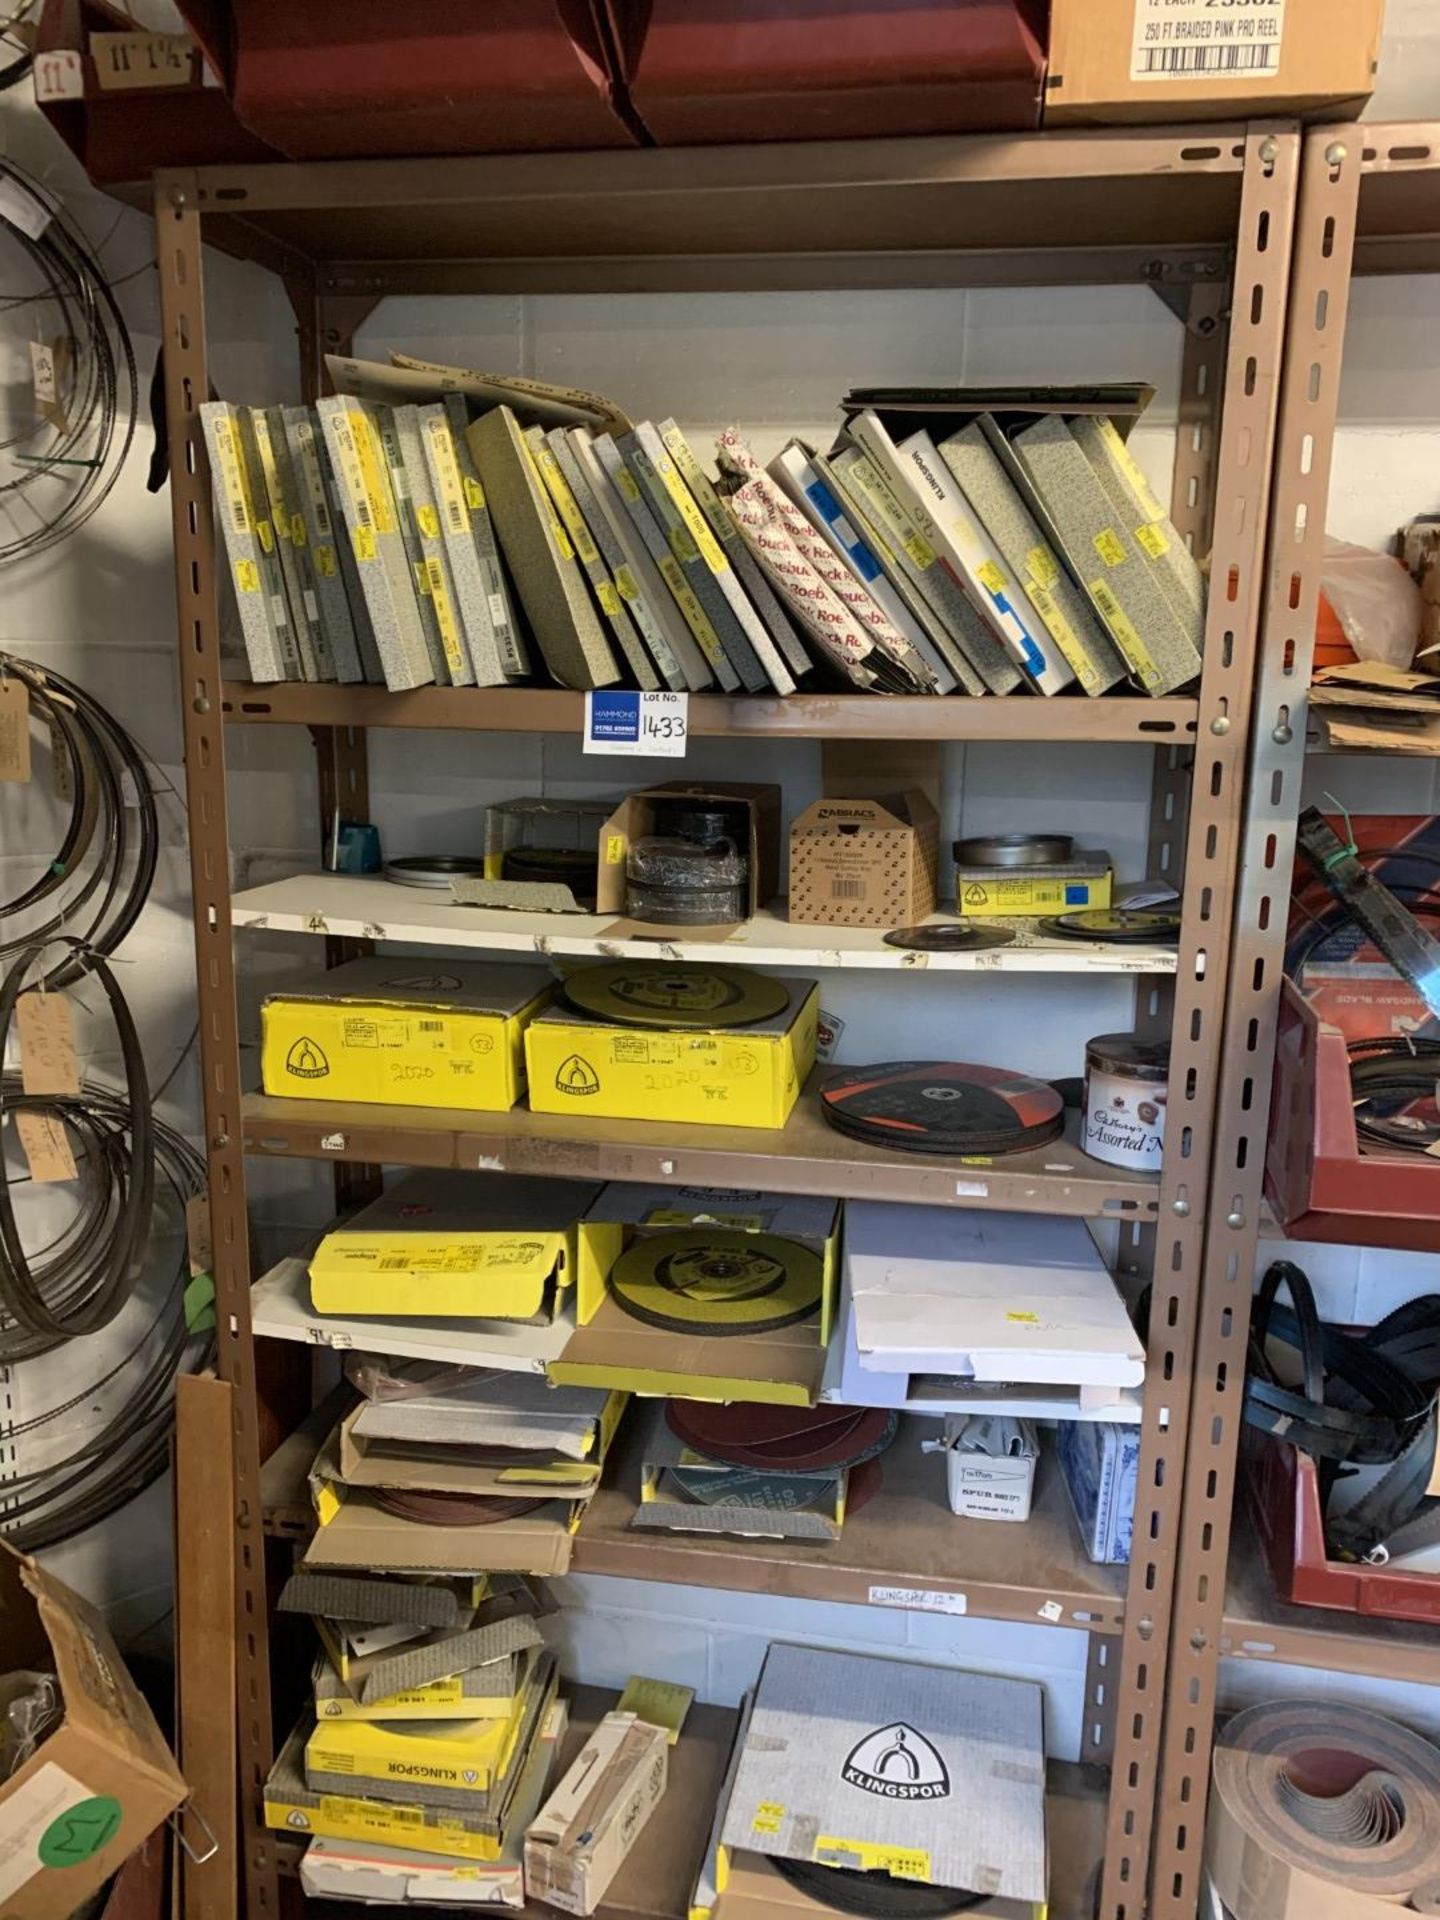 Metal shelves and contents including Klingspor abrasive disc and sand paper